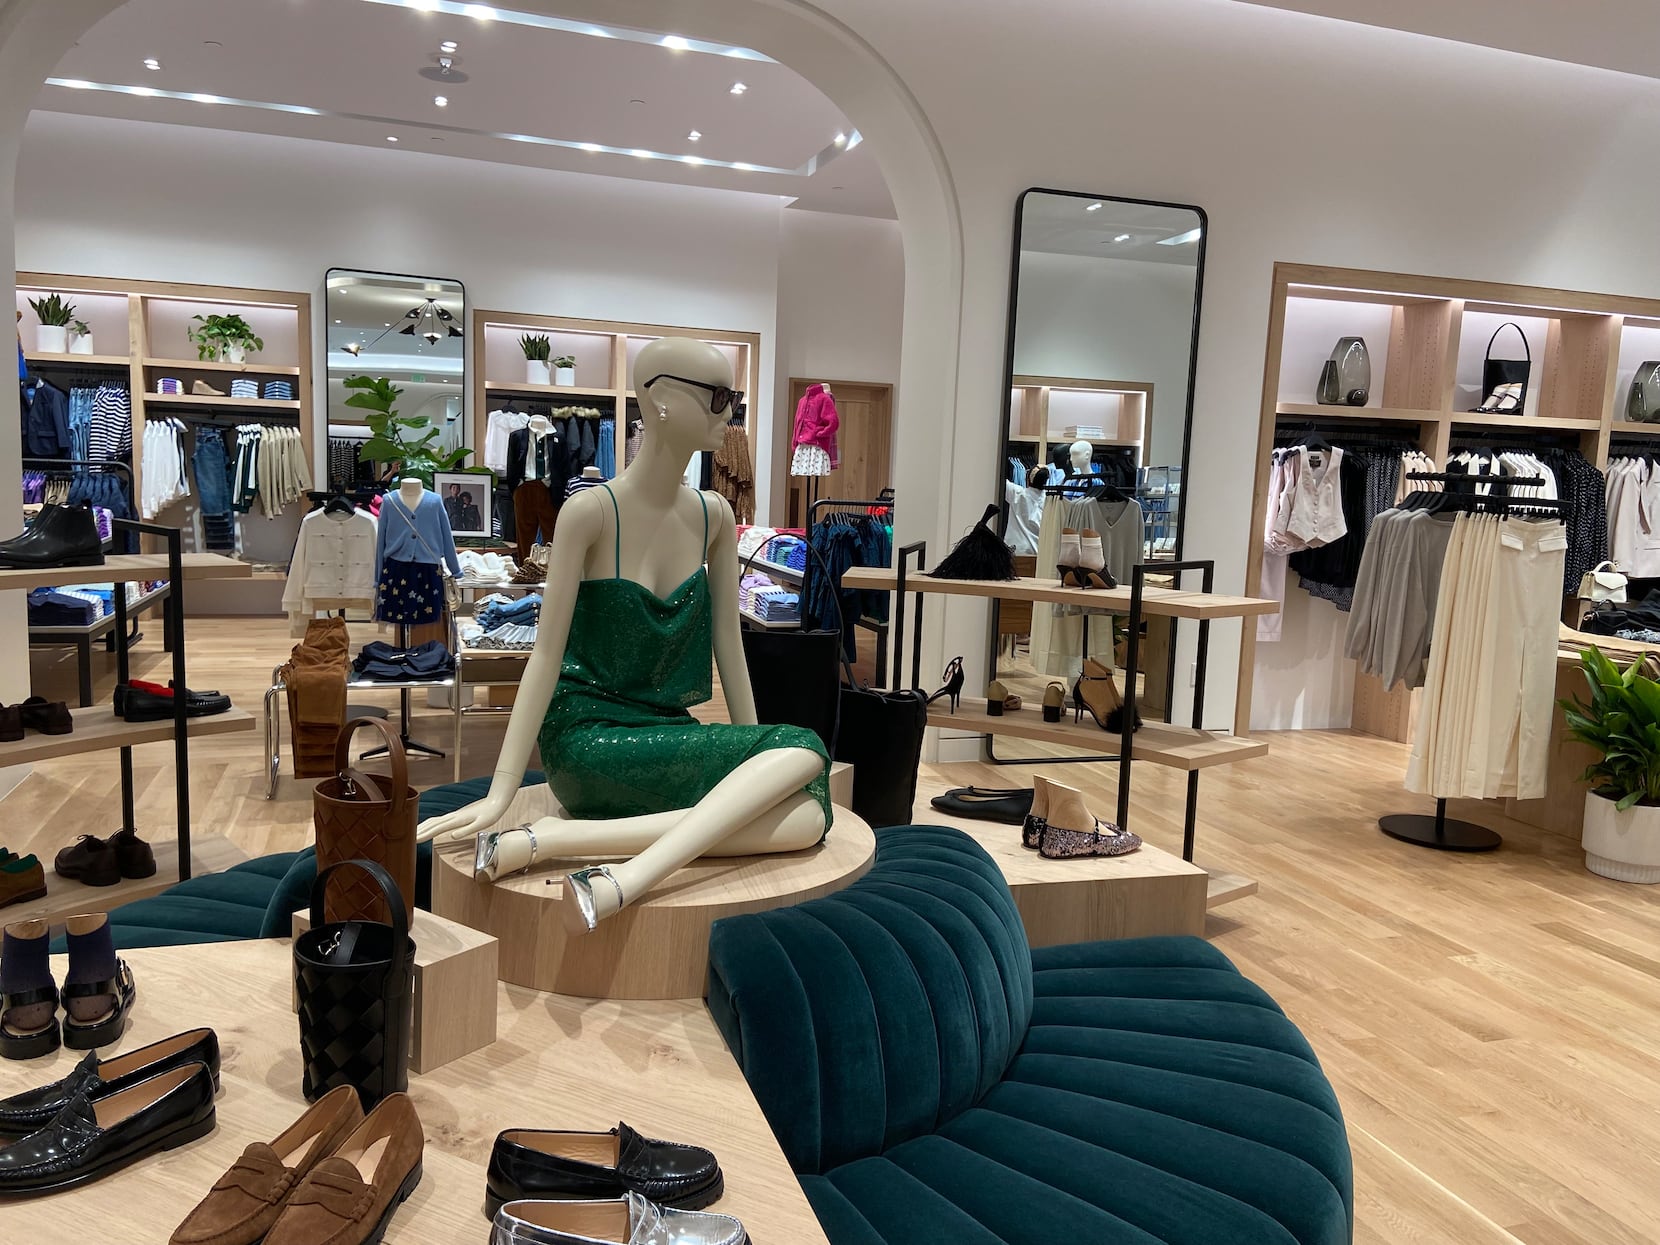 Leatherology Expands Into Retail With NorthPark Center Store